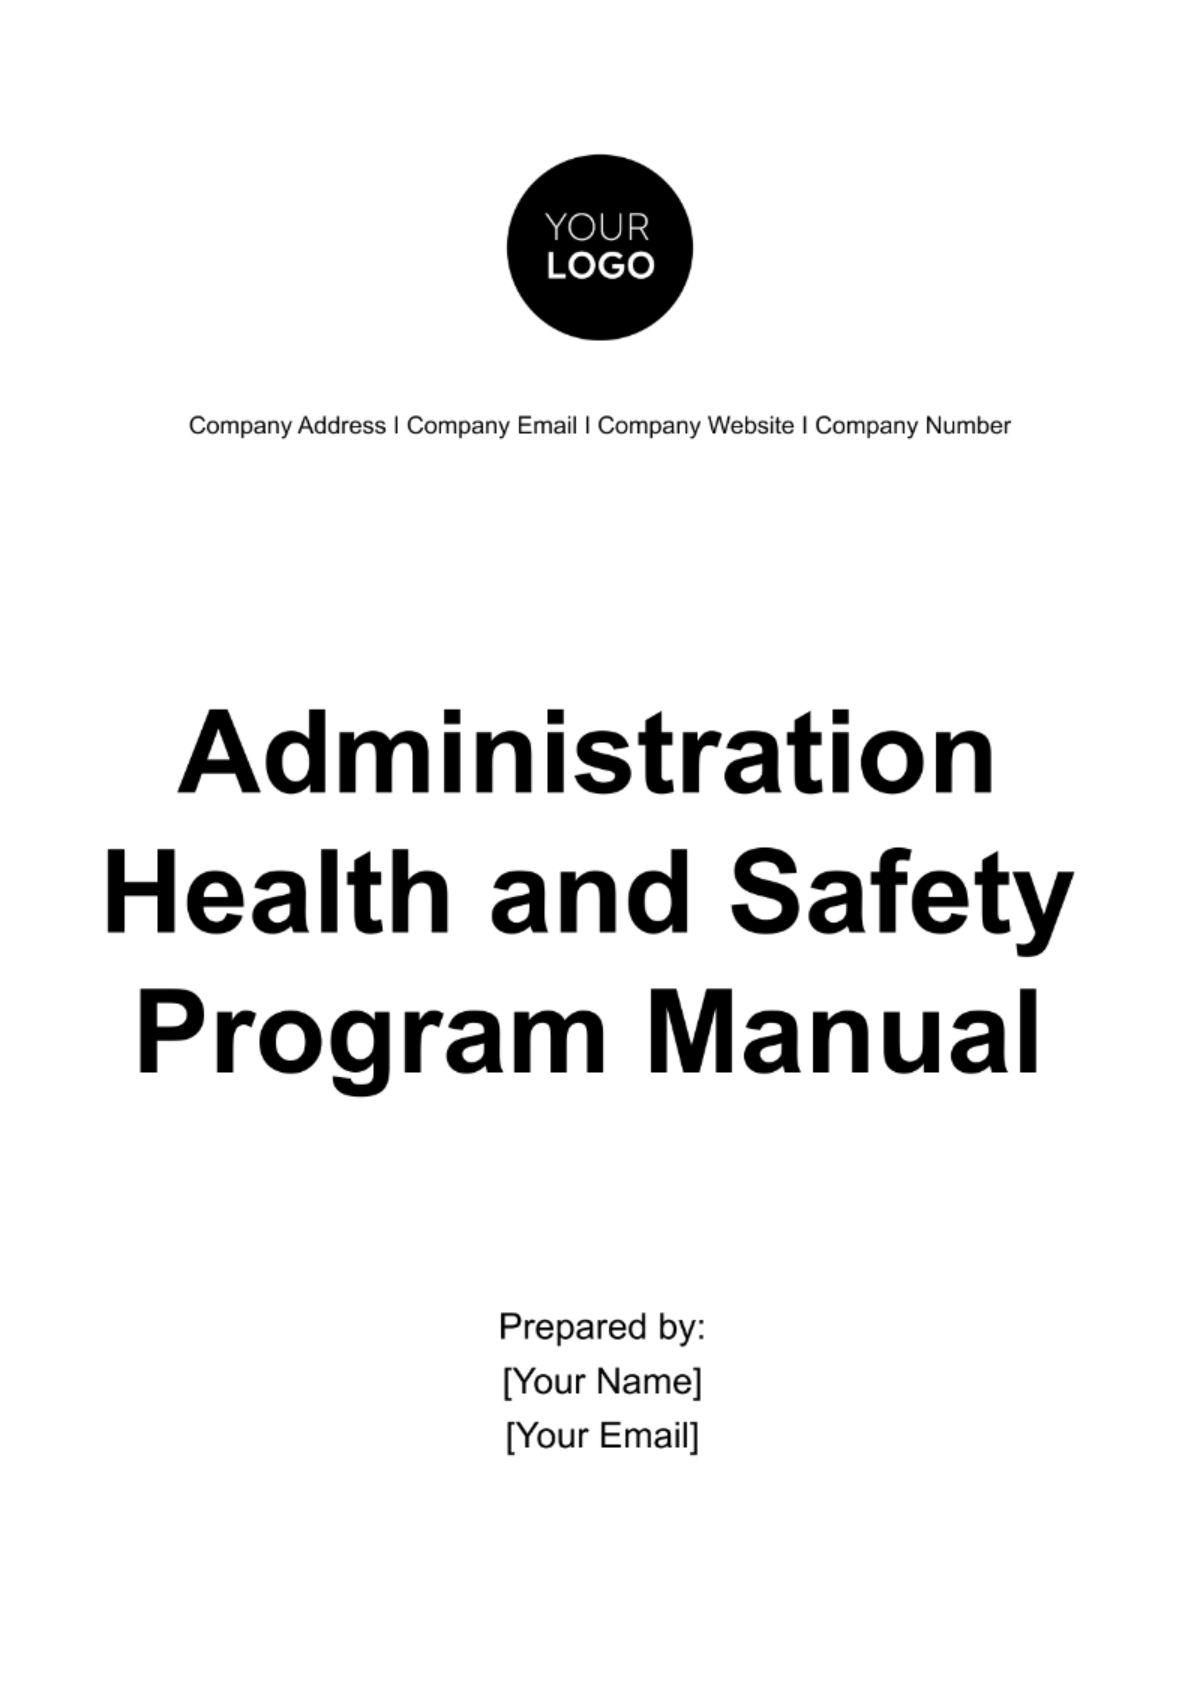 Administration Health and Safety Program Manual Template